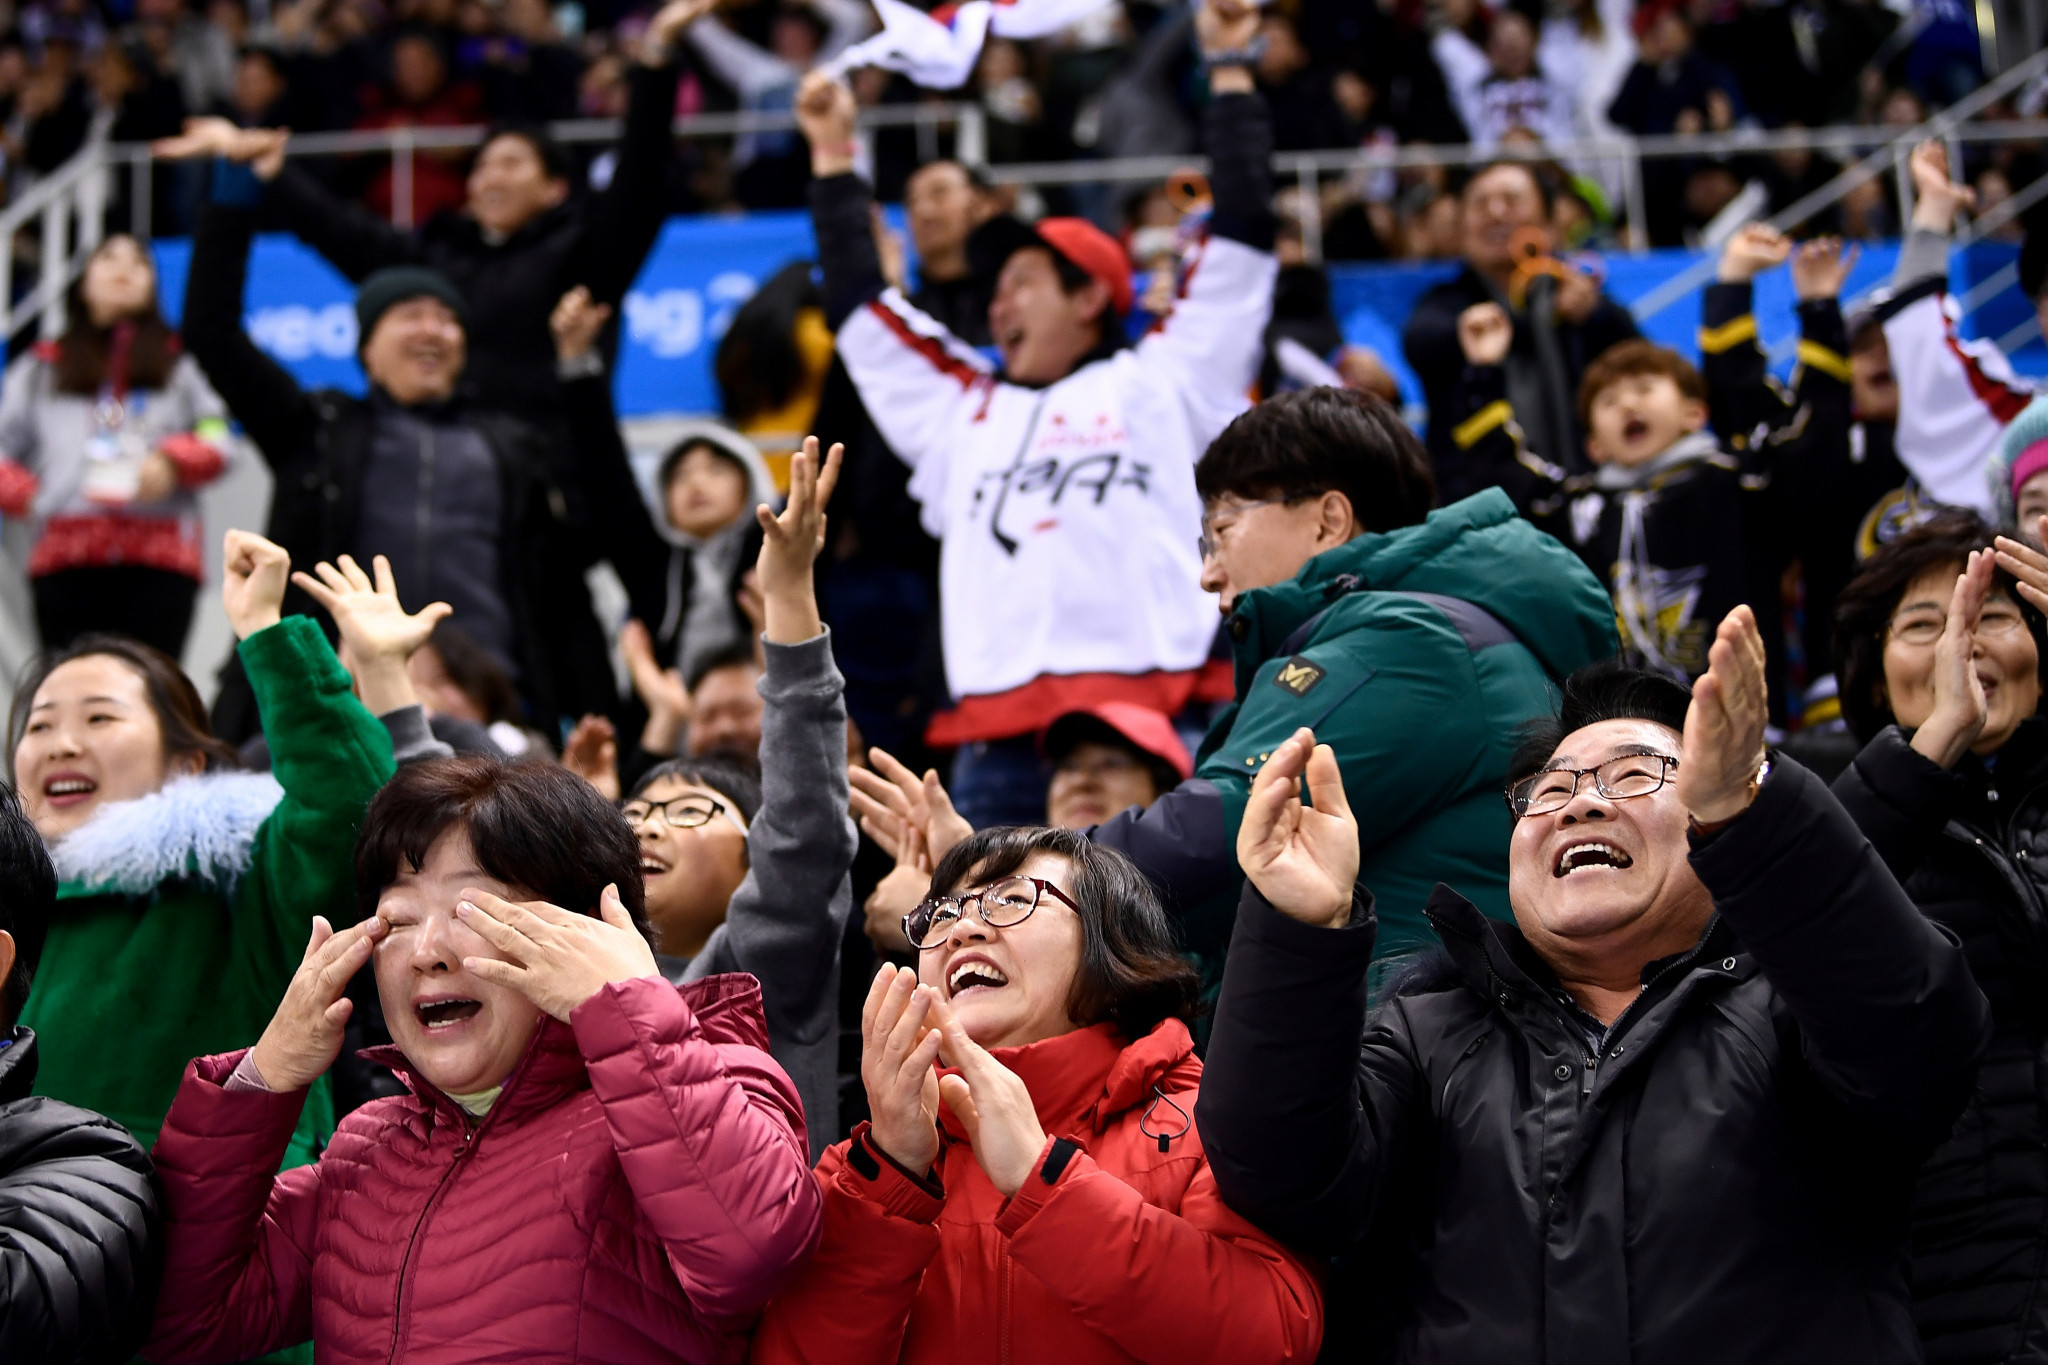 Spectators cheer at the ice hockey as South Korea competed ©Getty Images